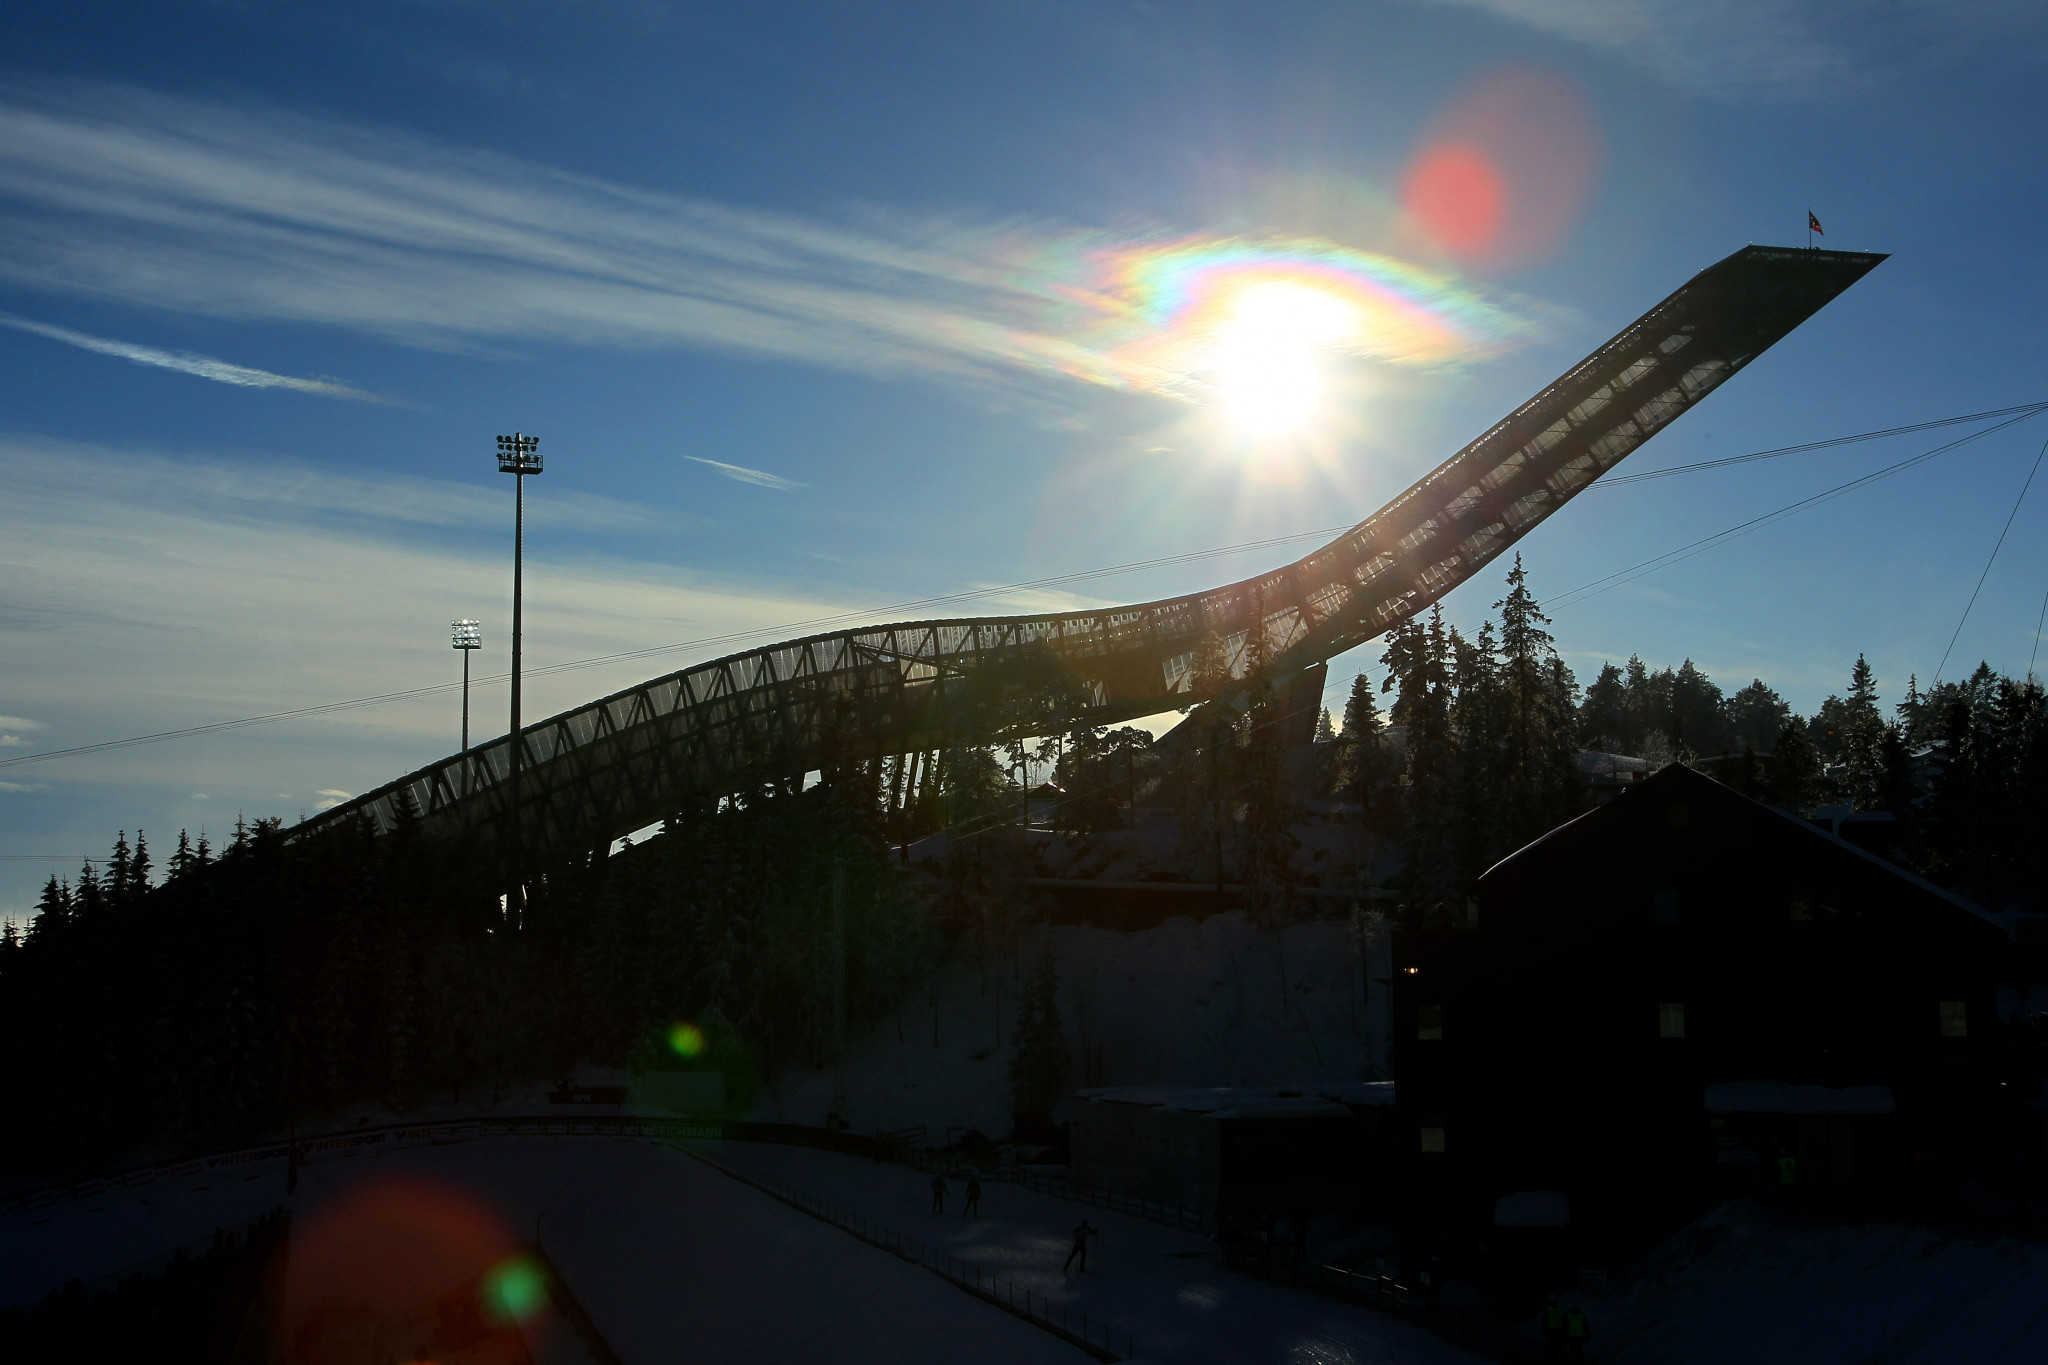 The Holmenkollen ski jump will host the City Event of the FIS Alpine Ski World Cup ©Getty Images